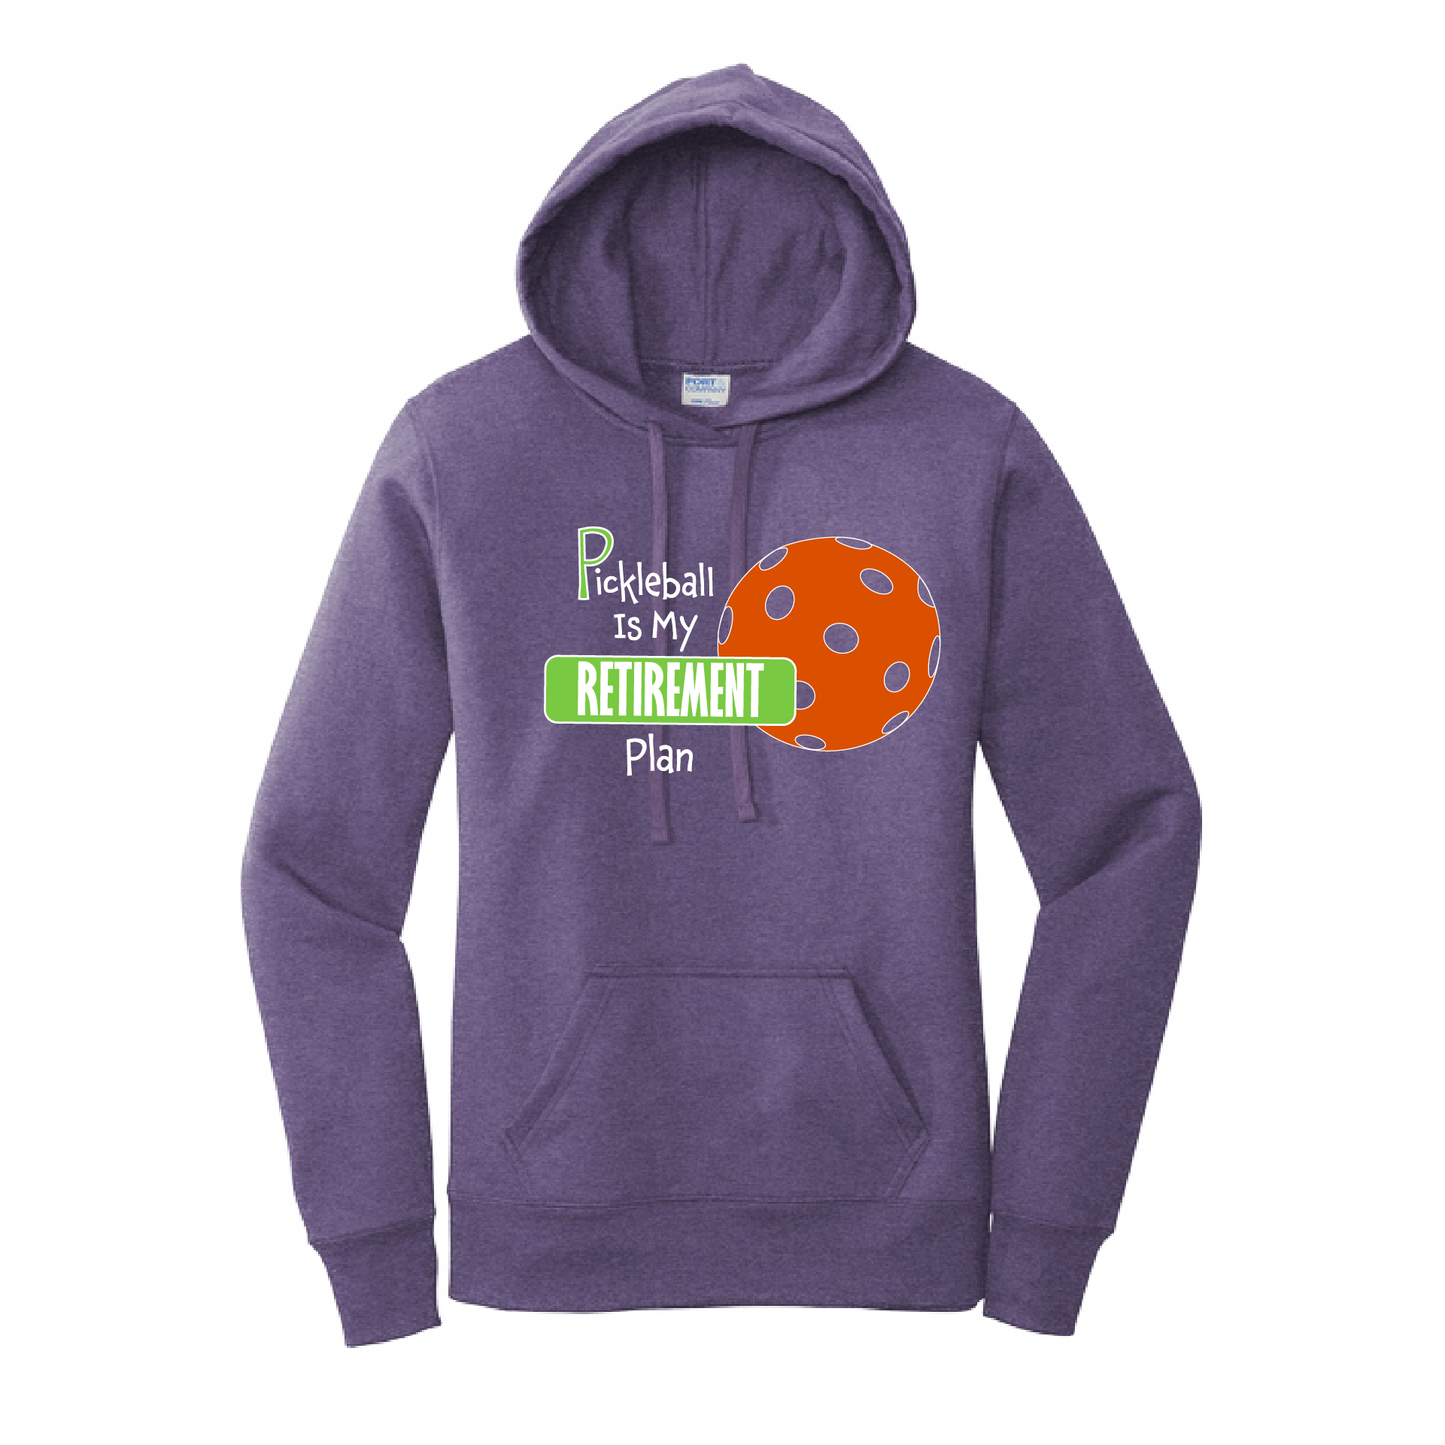 Pickleball Design: Pickleball is my Retirement plan  Women's Hooded pullover Sweatshirt  Turn up the volume in this Women's Sweatshirts with its perfect mix of softness and attitude. Ultra soft lined inside with a lined hood also. This is fitted nicely for a women's figure. Front pouch pocket.